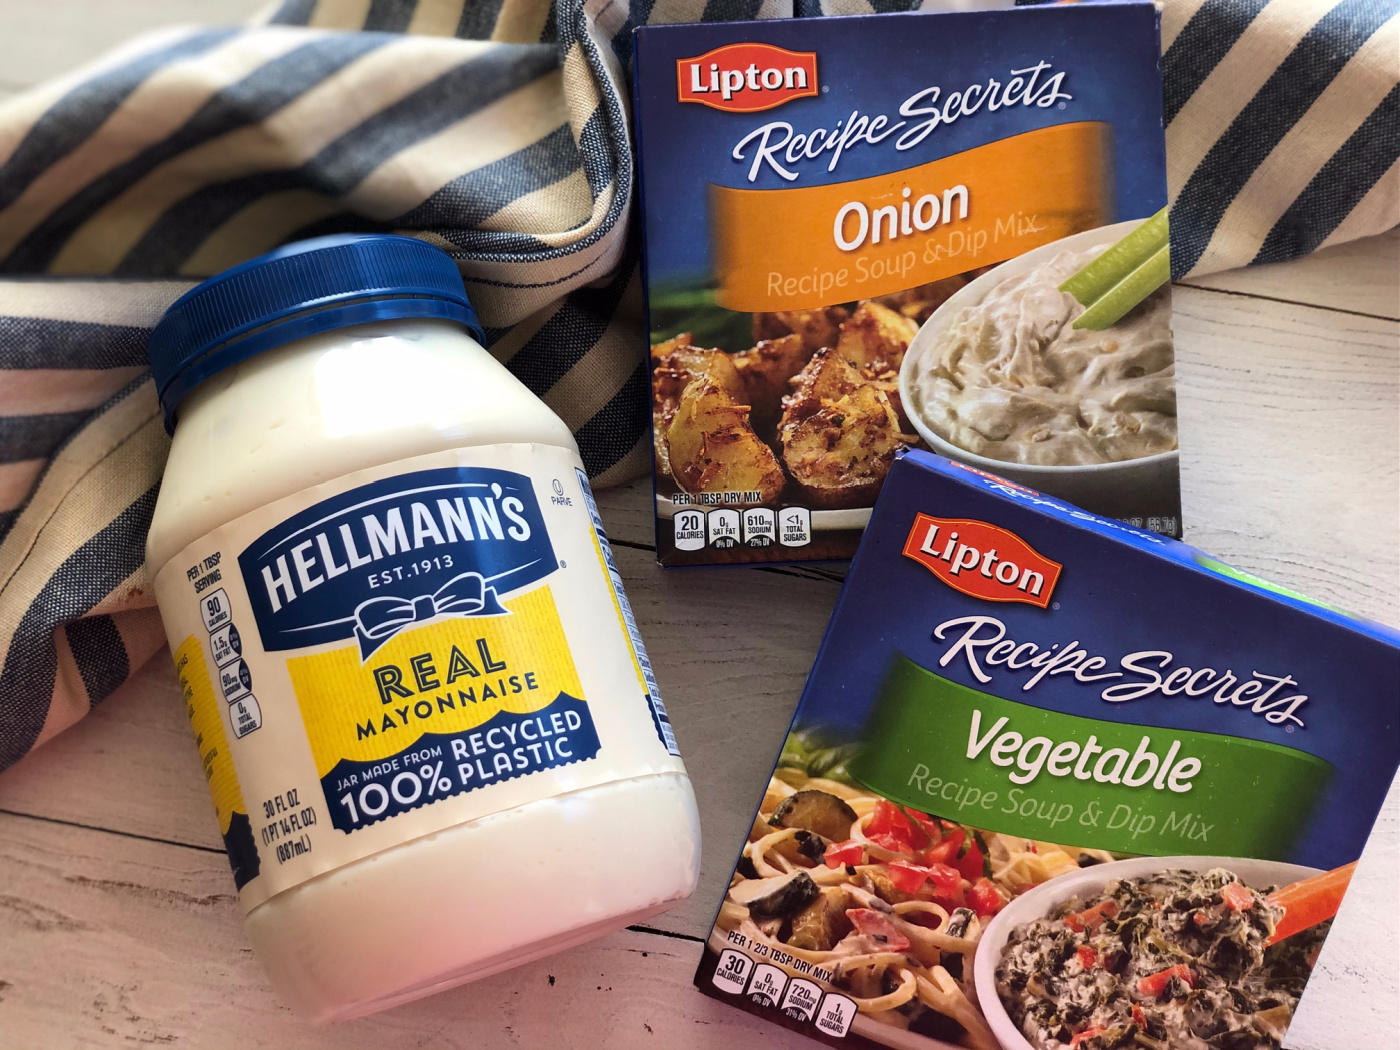 Big Savings On Hellmann's Mayonnaise & Lipton Recipe Secrets At Publix - Don't Miss Out On Great Deals On Pantry Staples on I Heart Publix